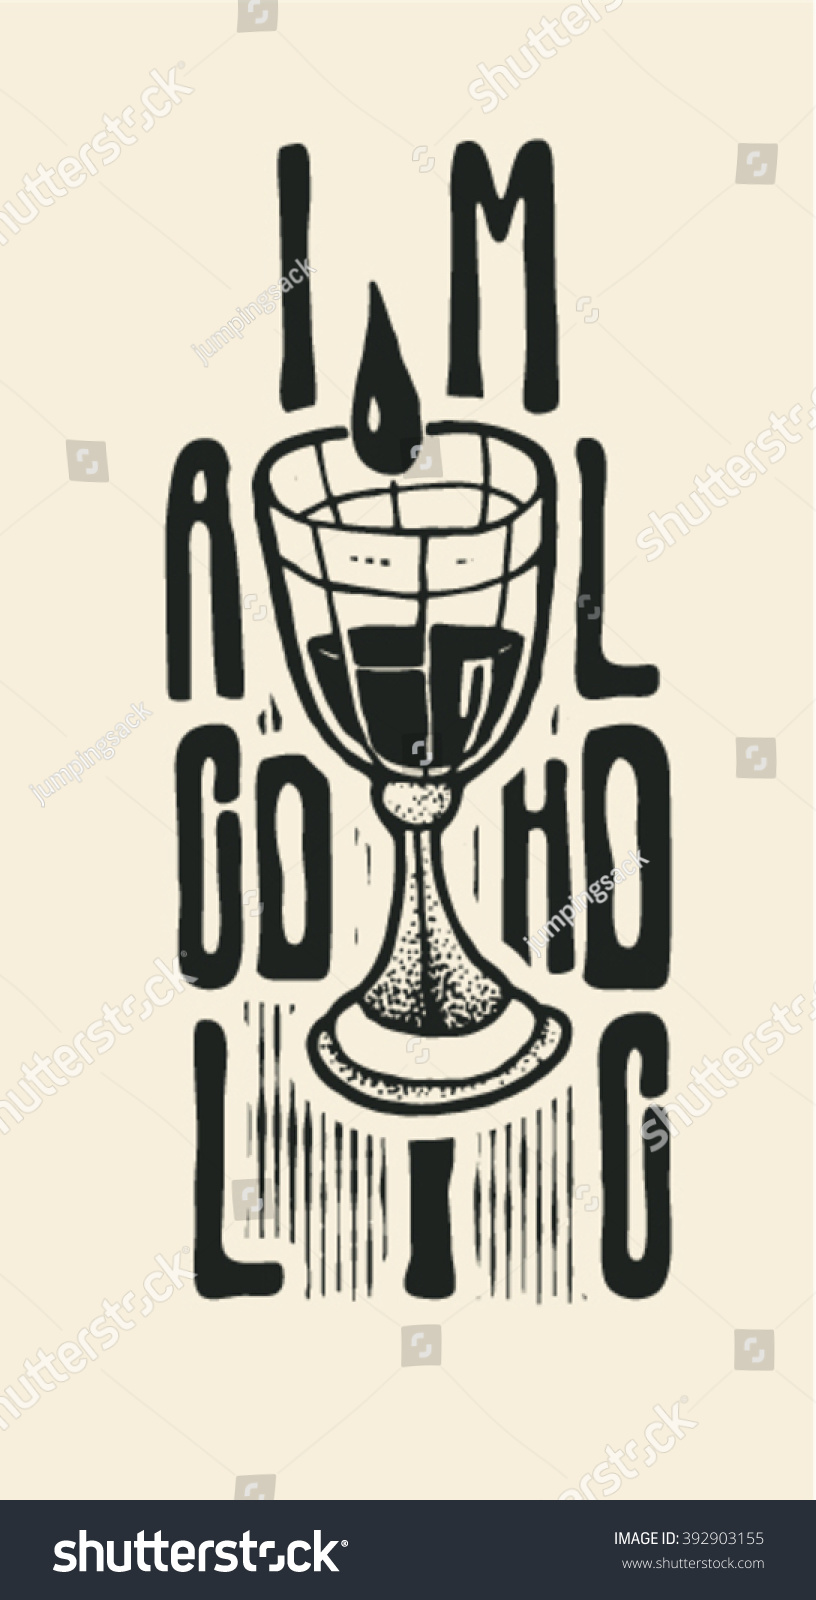 SVG of Design I`m alcoholic for t-shirt print, poster or tattoo with full beaker of wine and fonts. typography vector illustration. svg